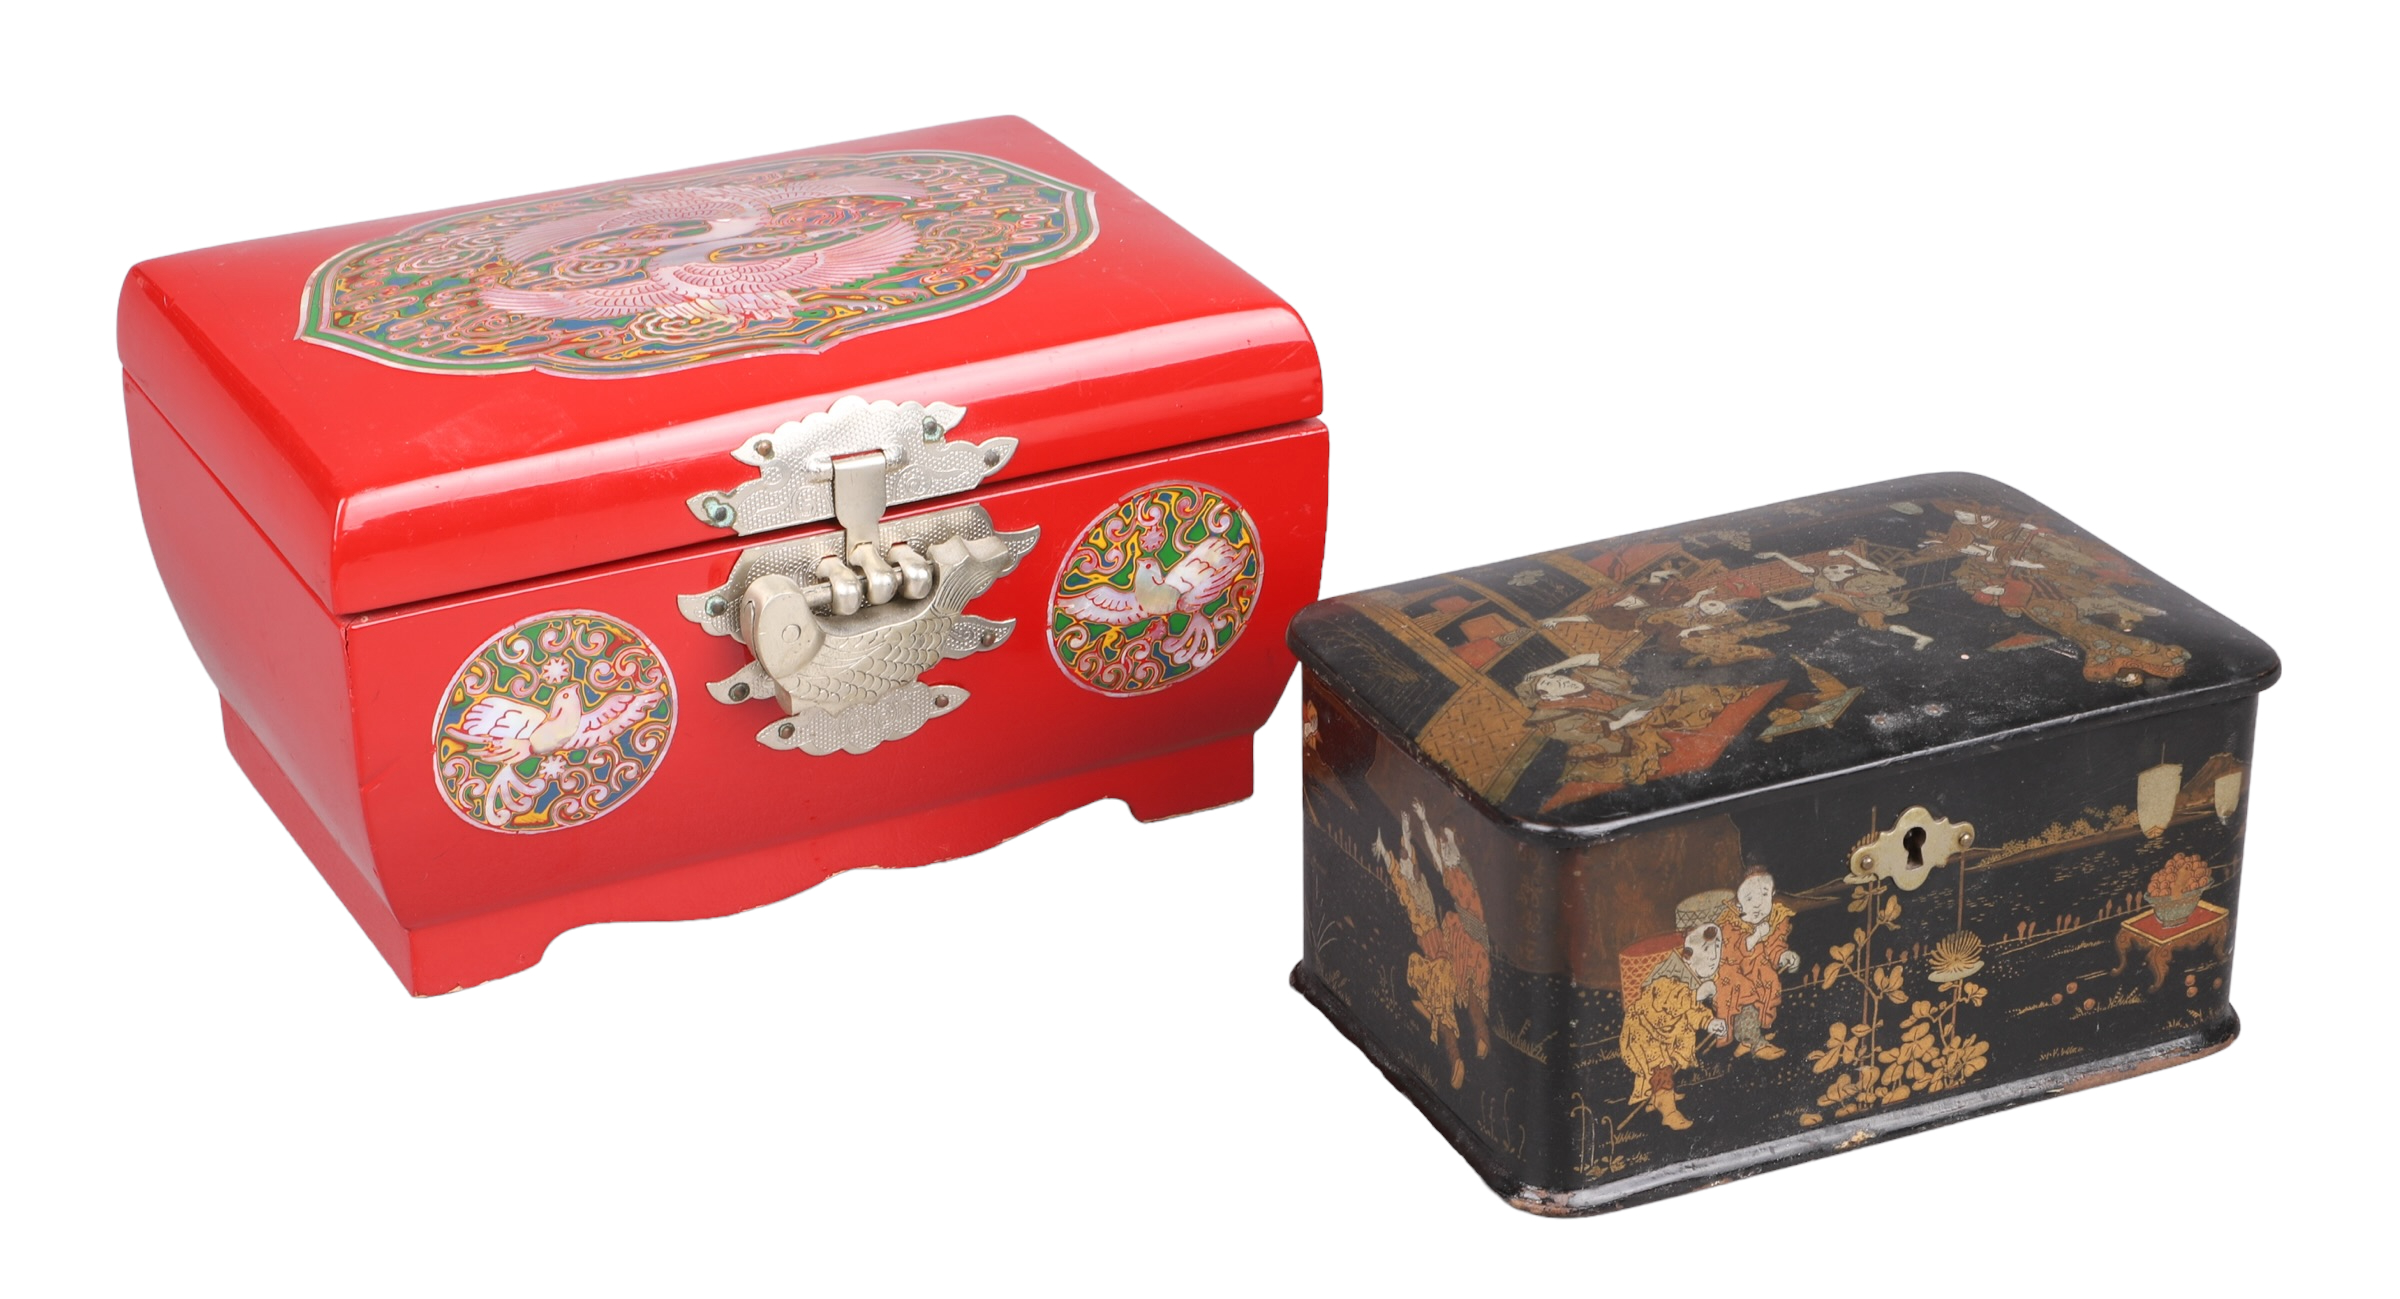  2 Chinese lacquer jewelry boxes  317f70